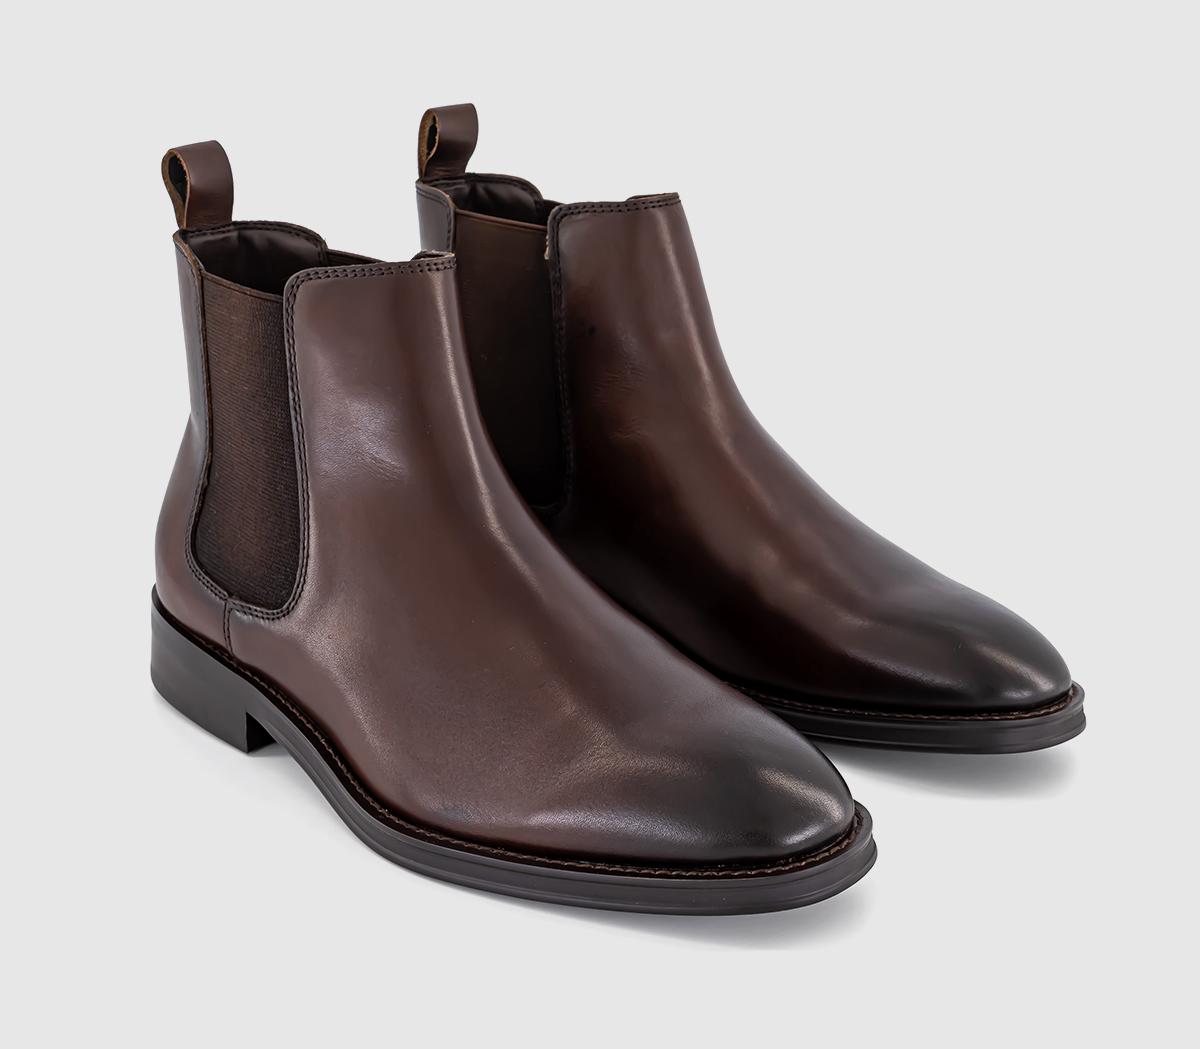 OFFICE Mens Blenheim Chelsea Boots Brown Leather, 9